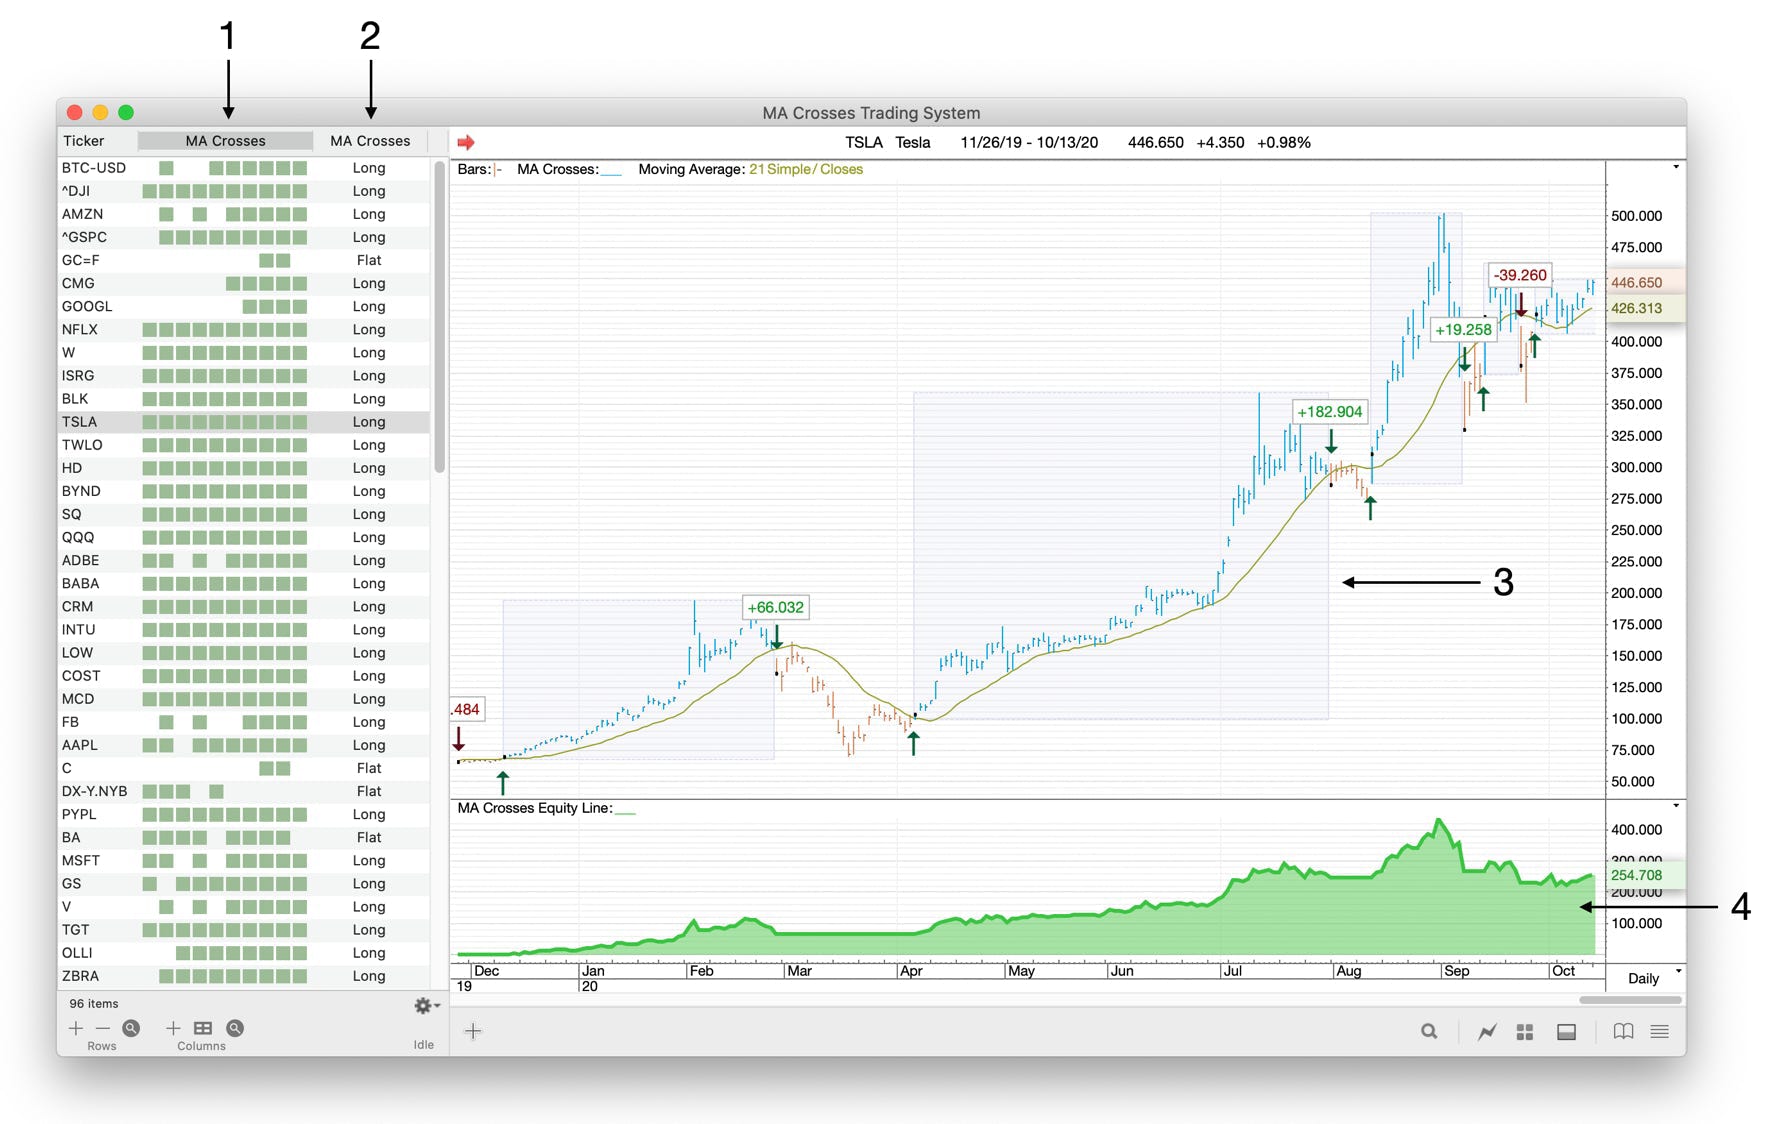 ProTA Chart Suite displaying Trading System data in three distinct areas